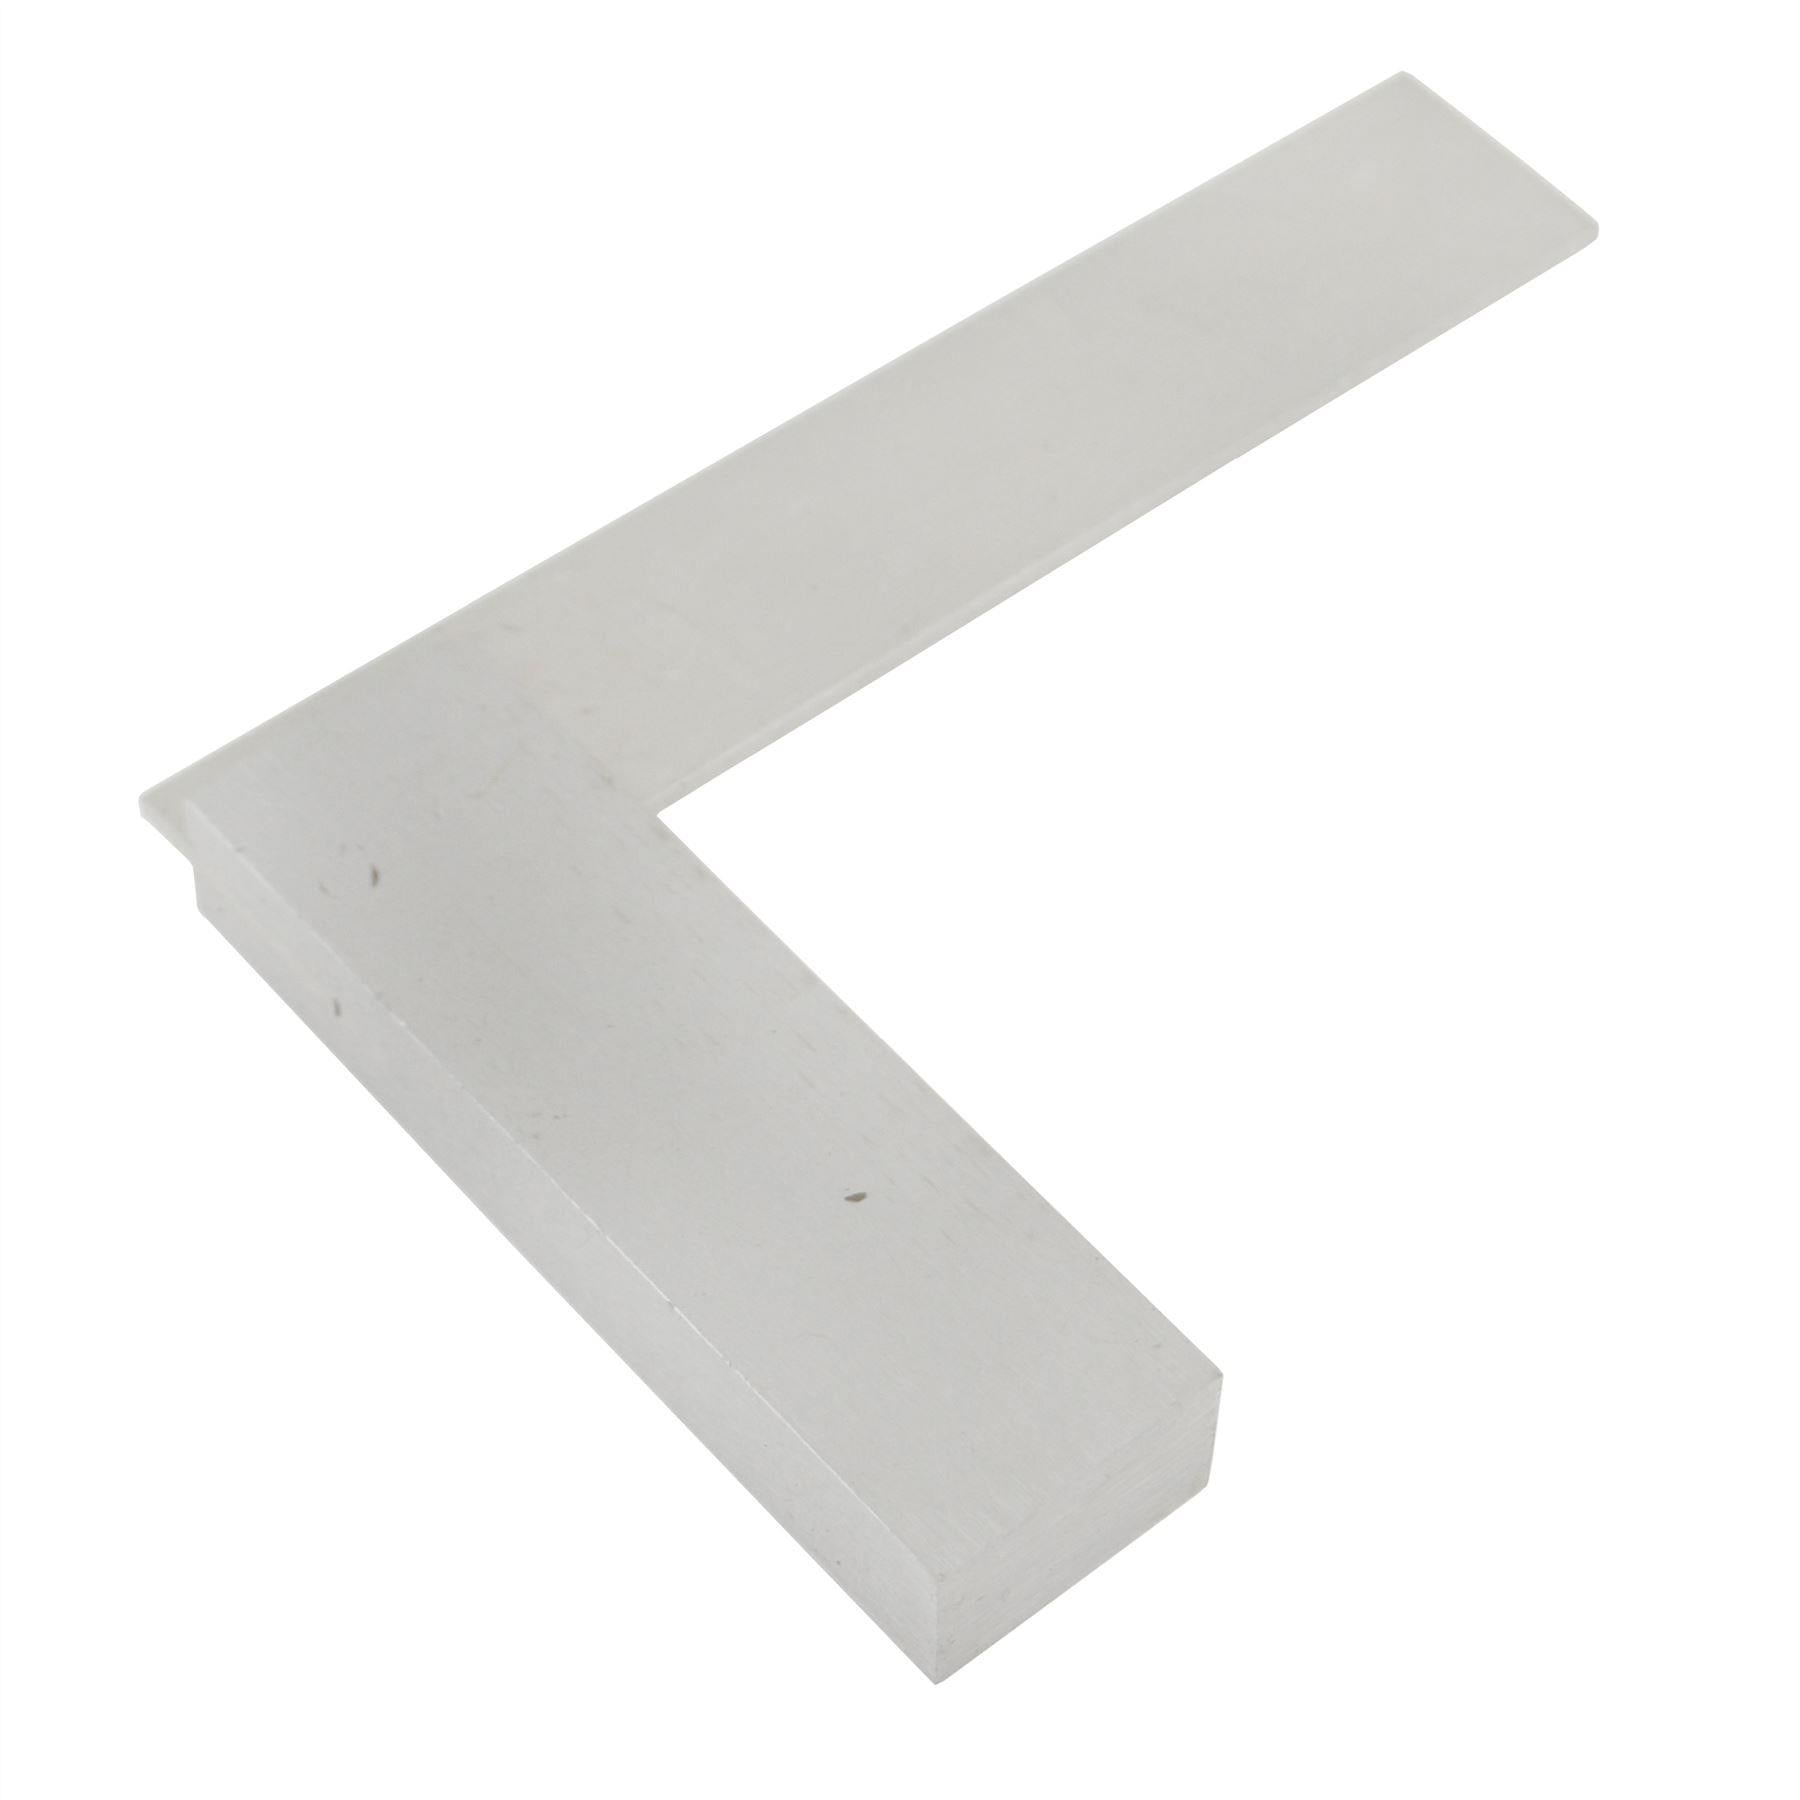 Engineers Tri Square Set Square Right Angle Straight Edge Steel Try 75 - 450mm